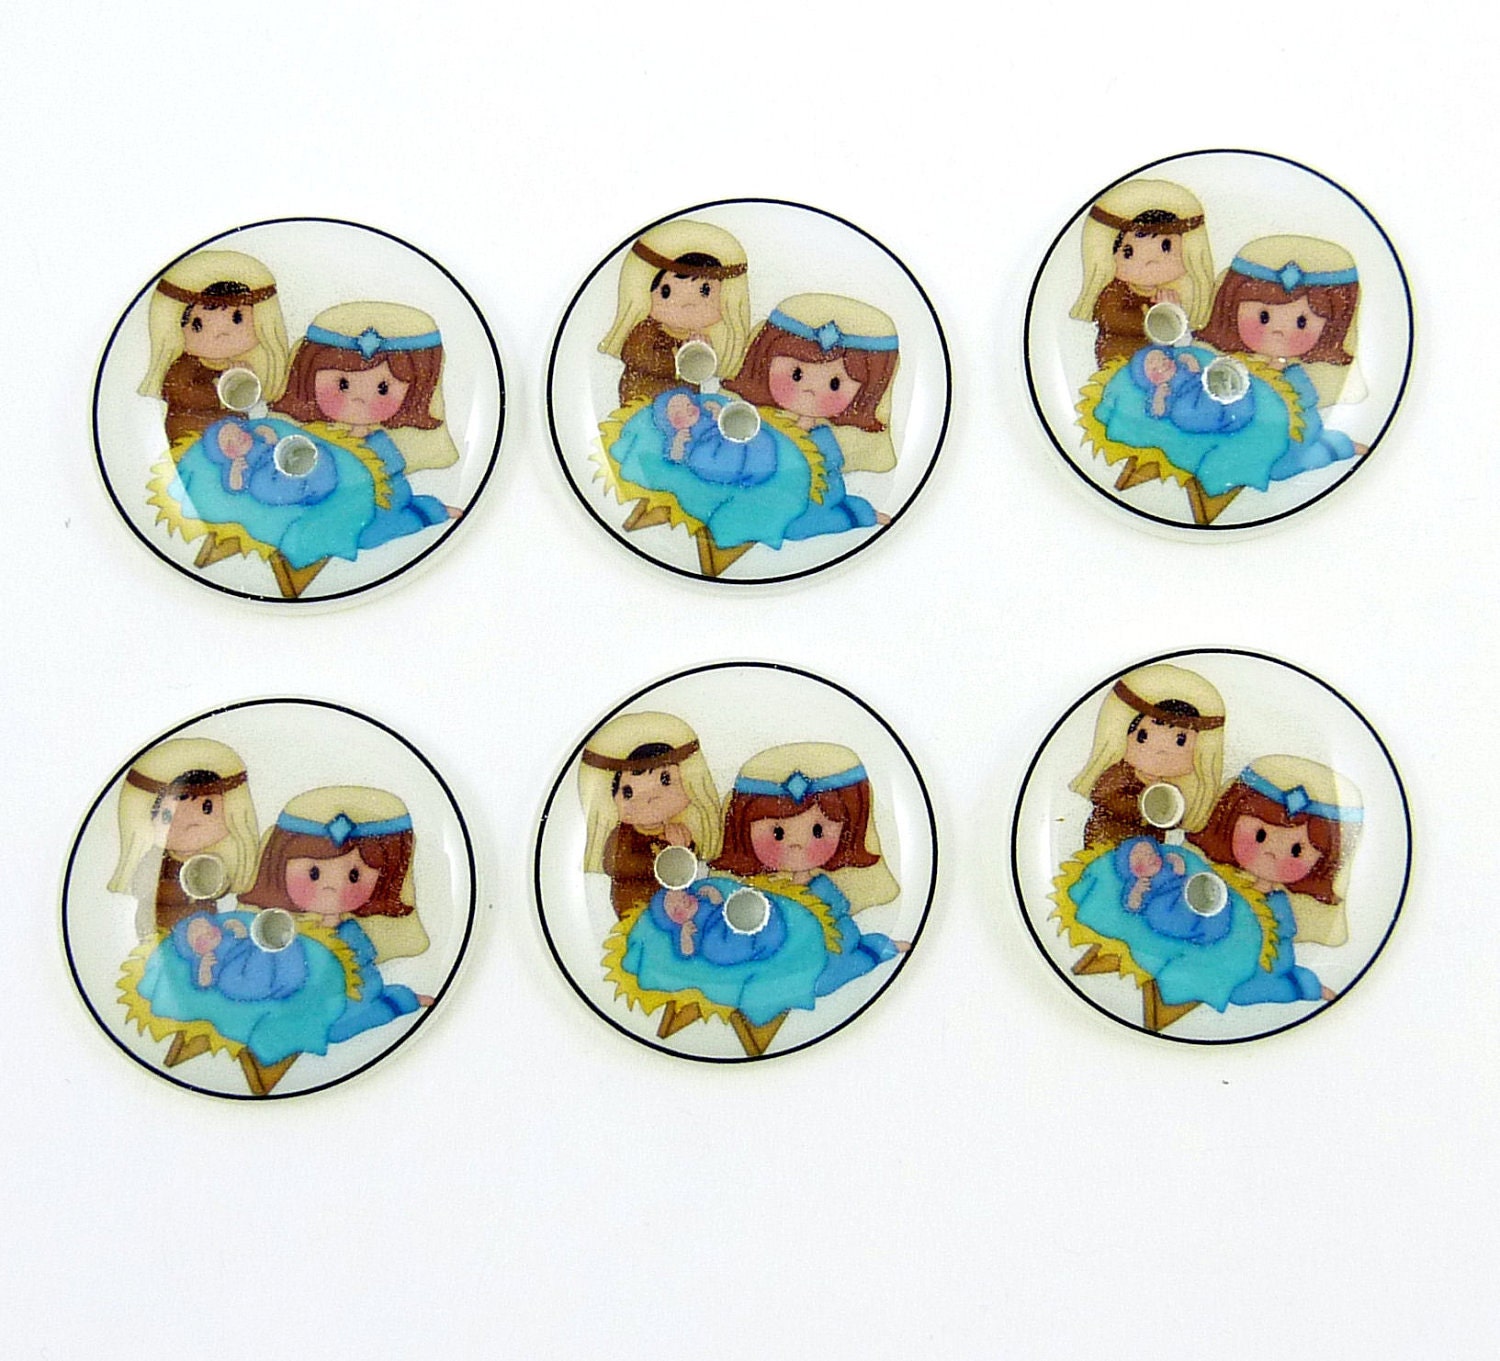 Christmas Nativity Buttons. Handmade buttons for sewing or